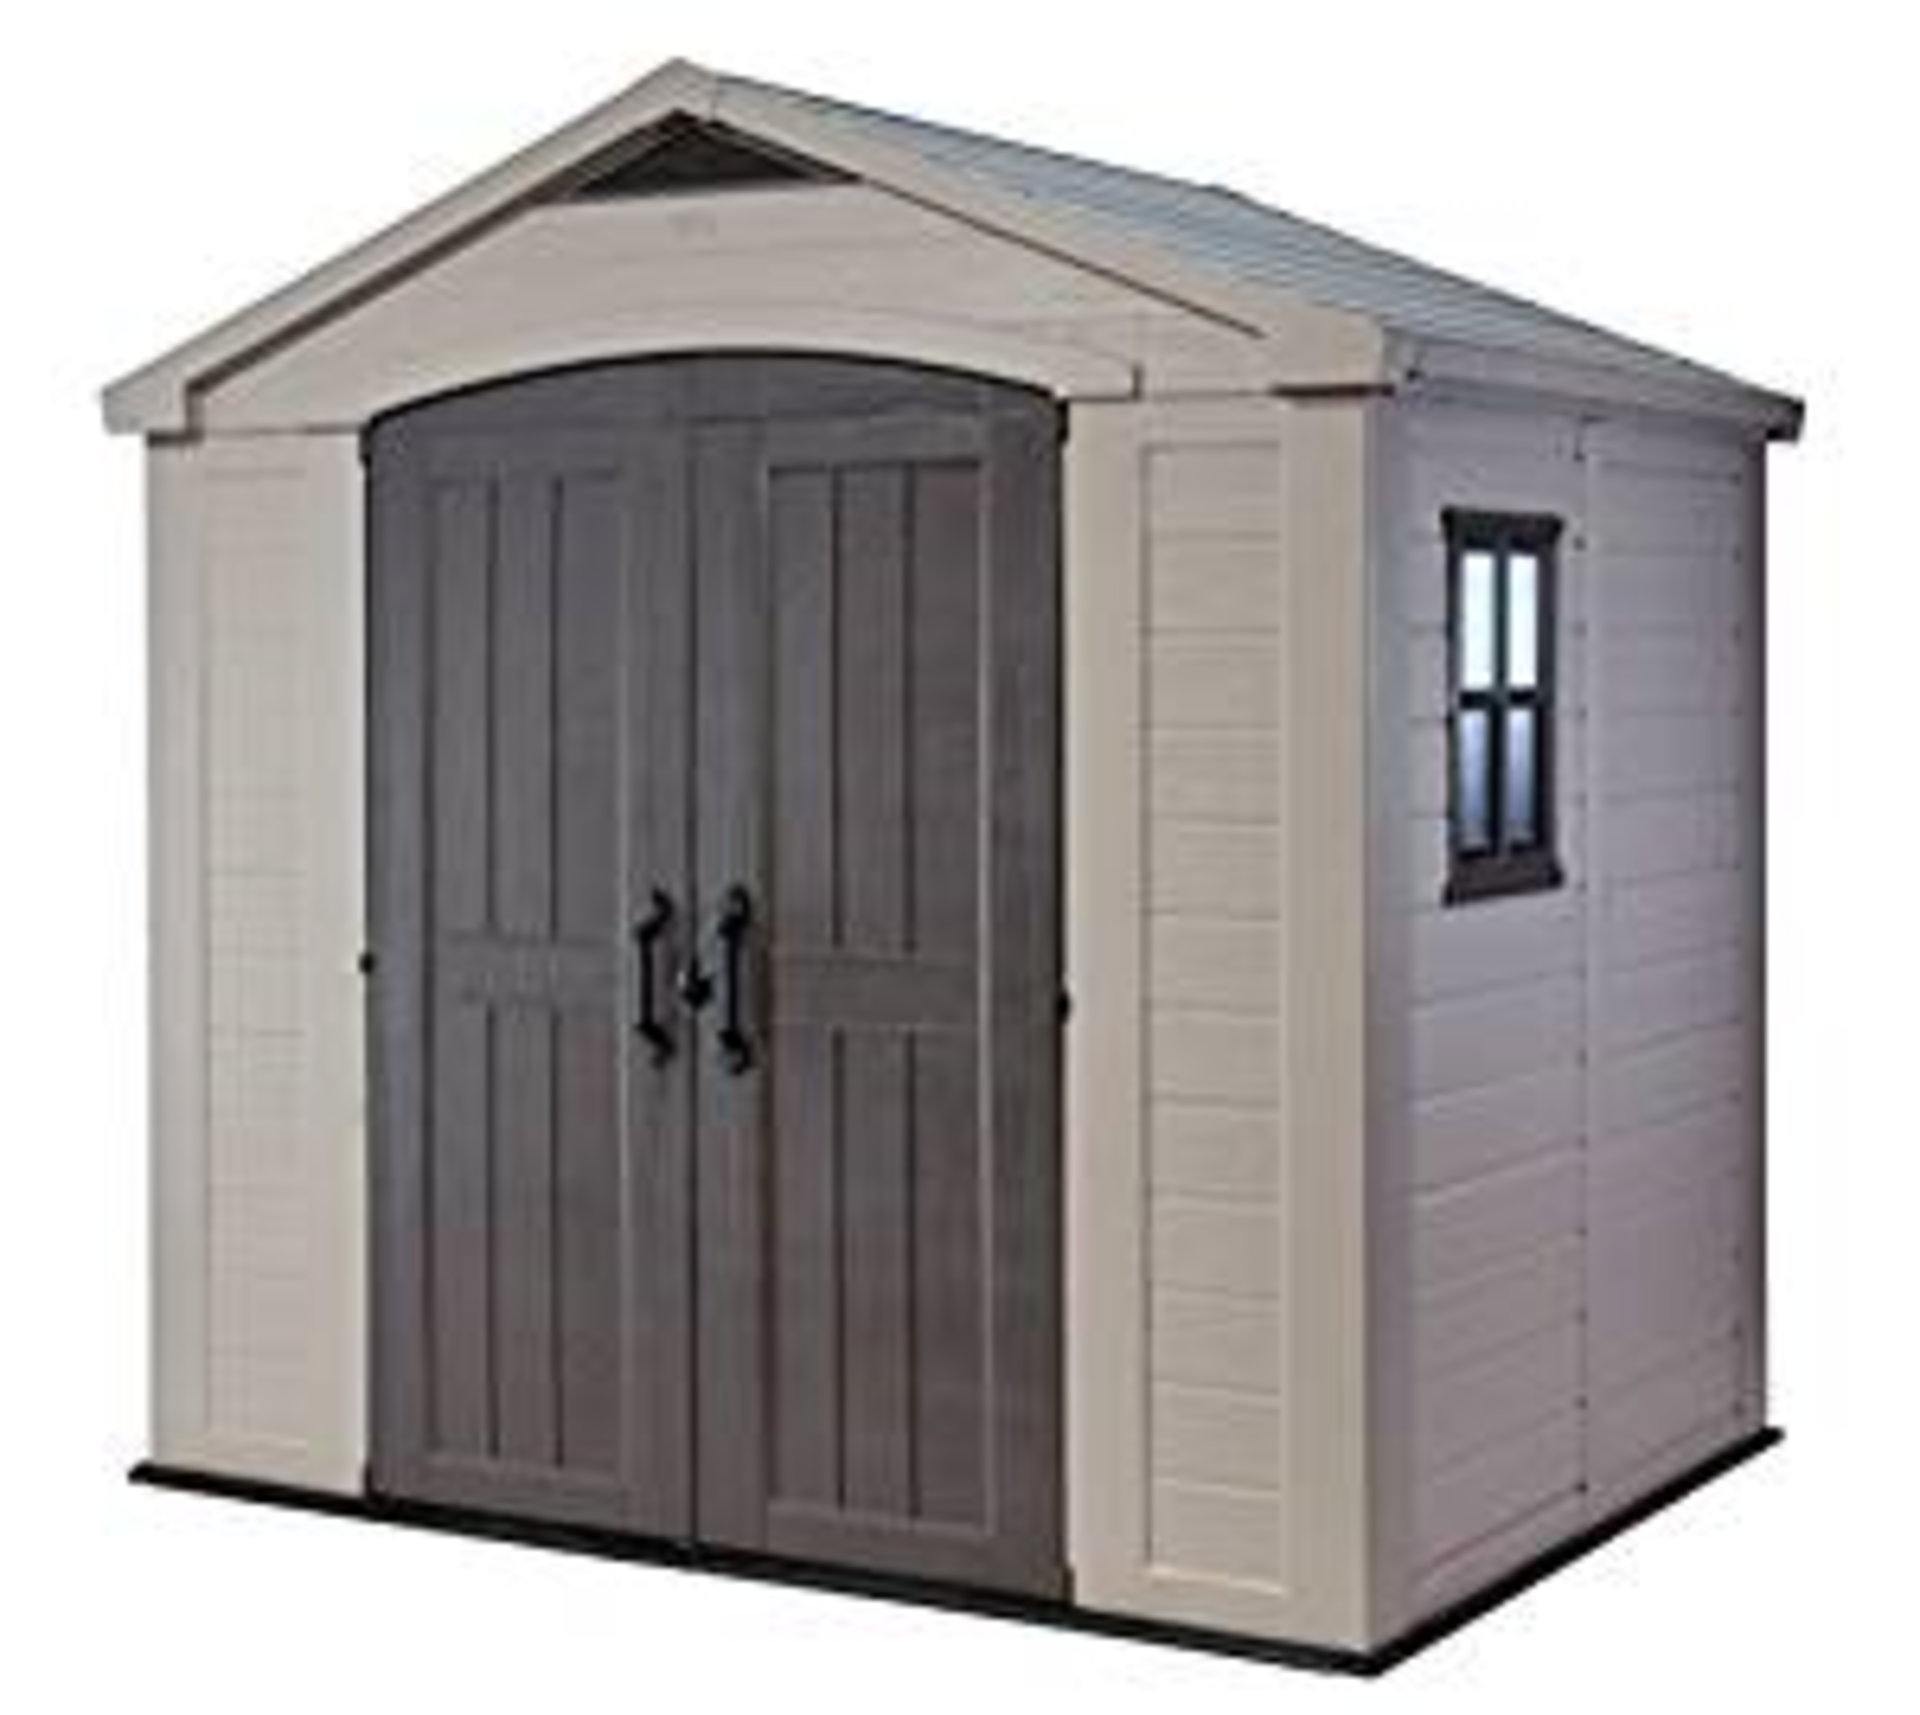 Brand new and boxed Keter Factor 8x6 shed - RRP £595